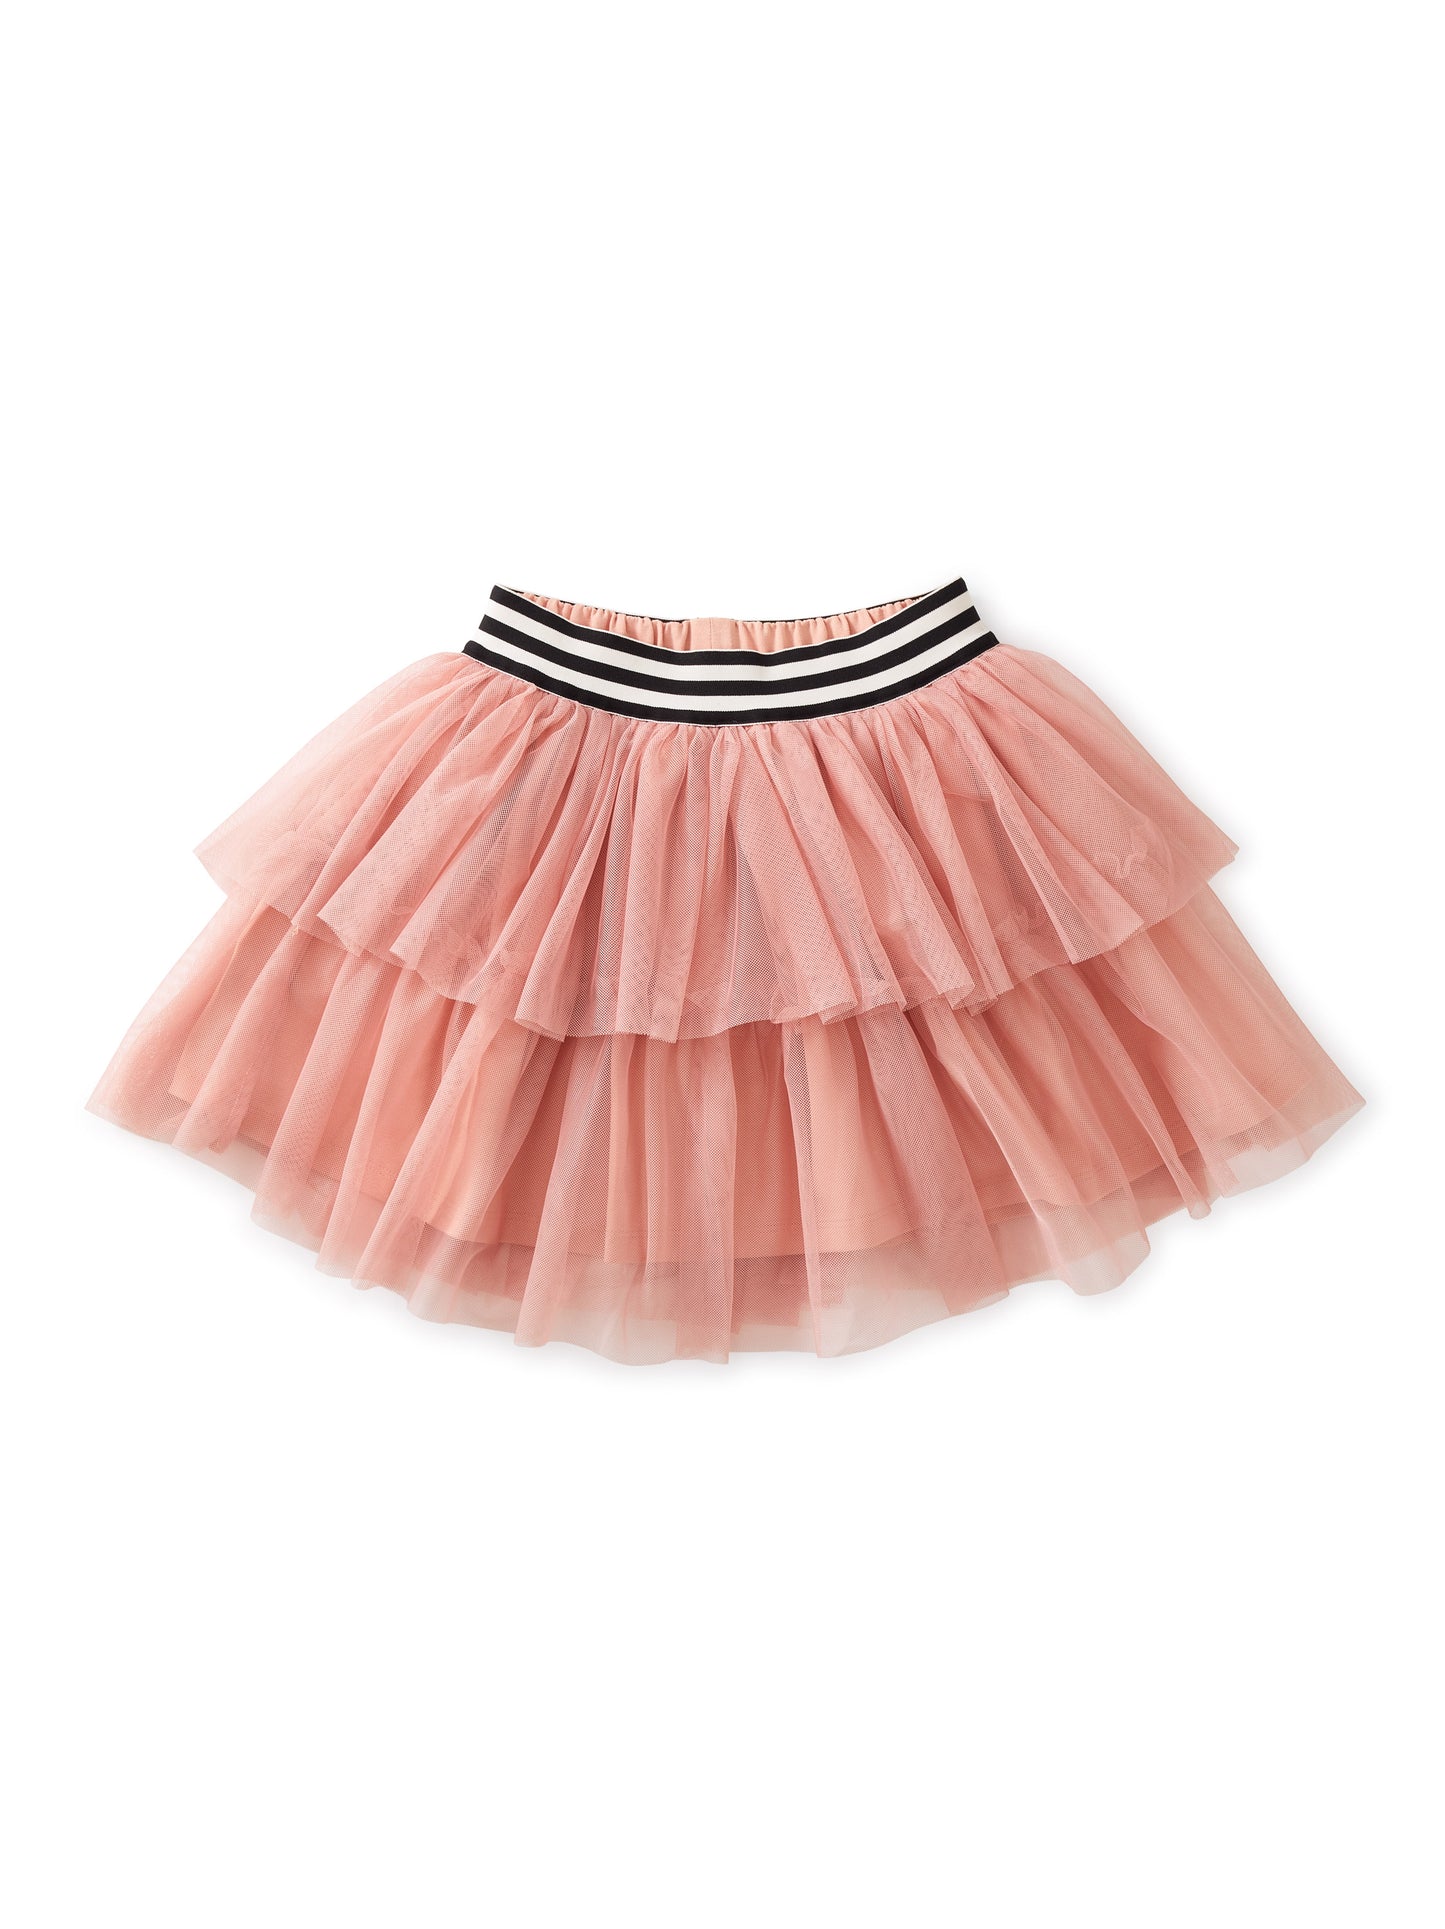 Tiered Tulle Skirt in Dusty Coral